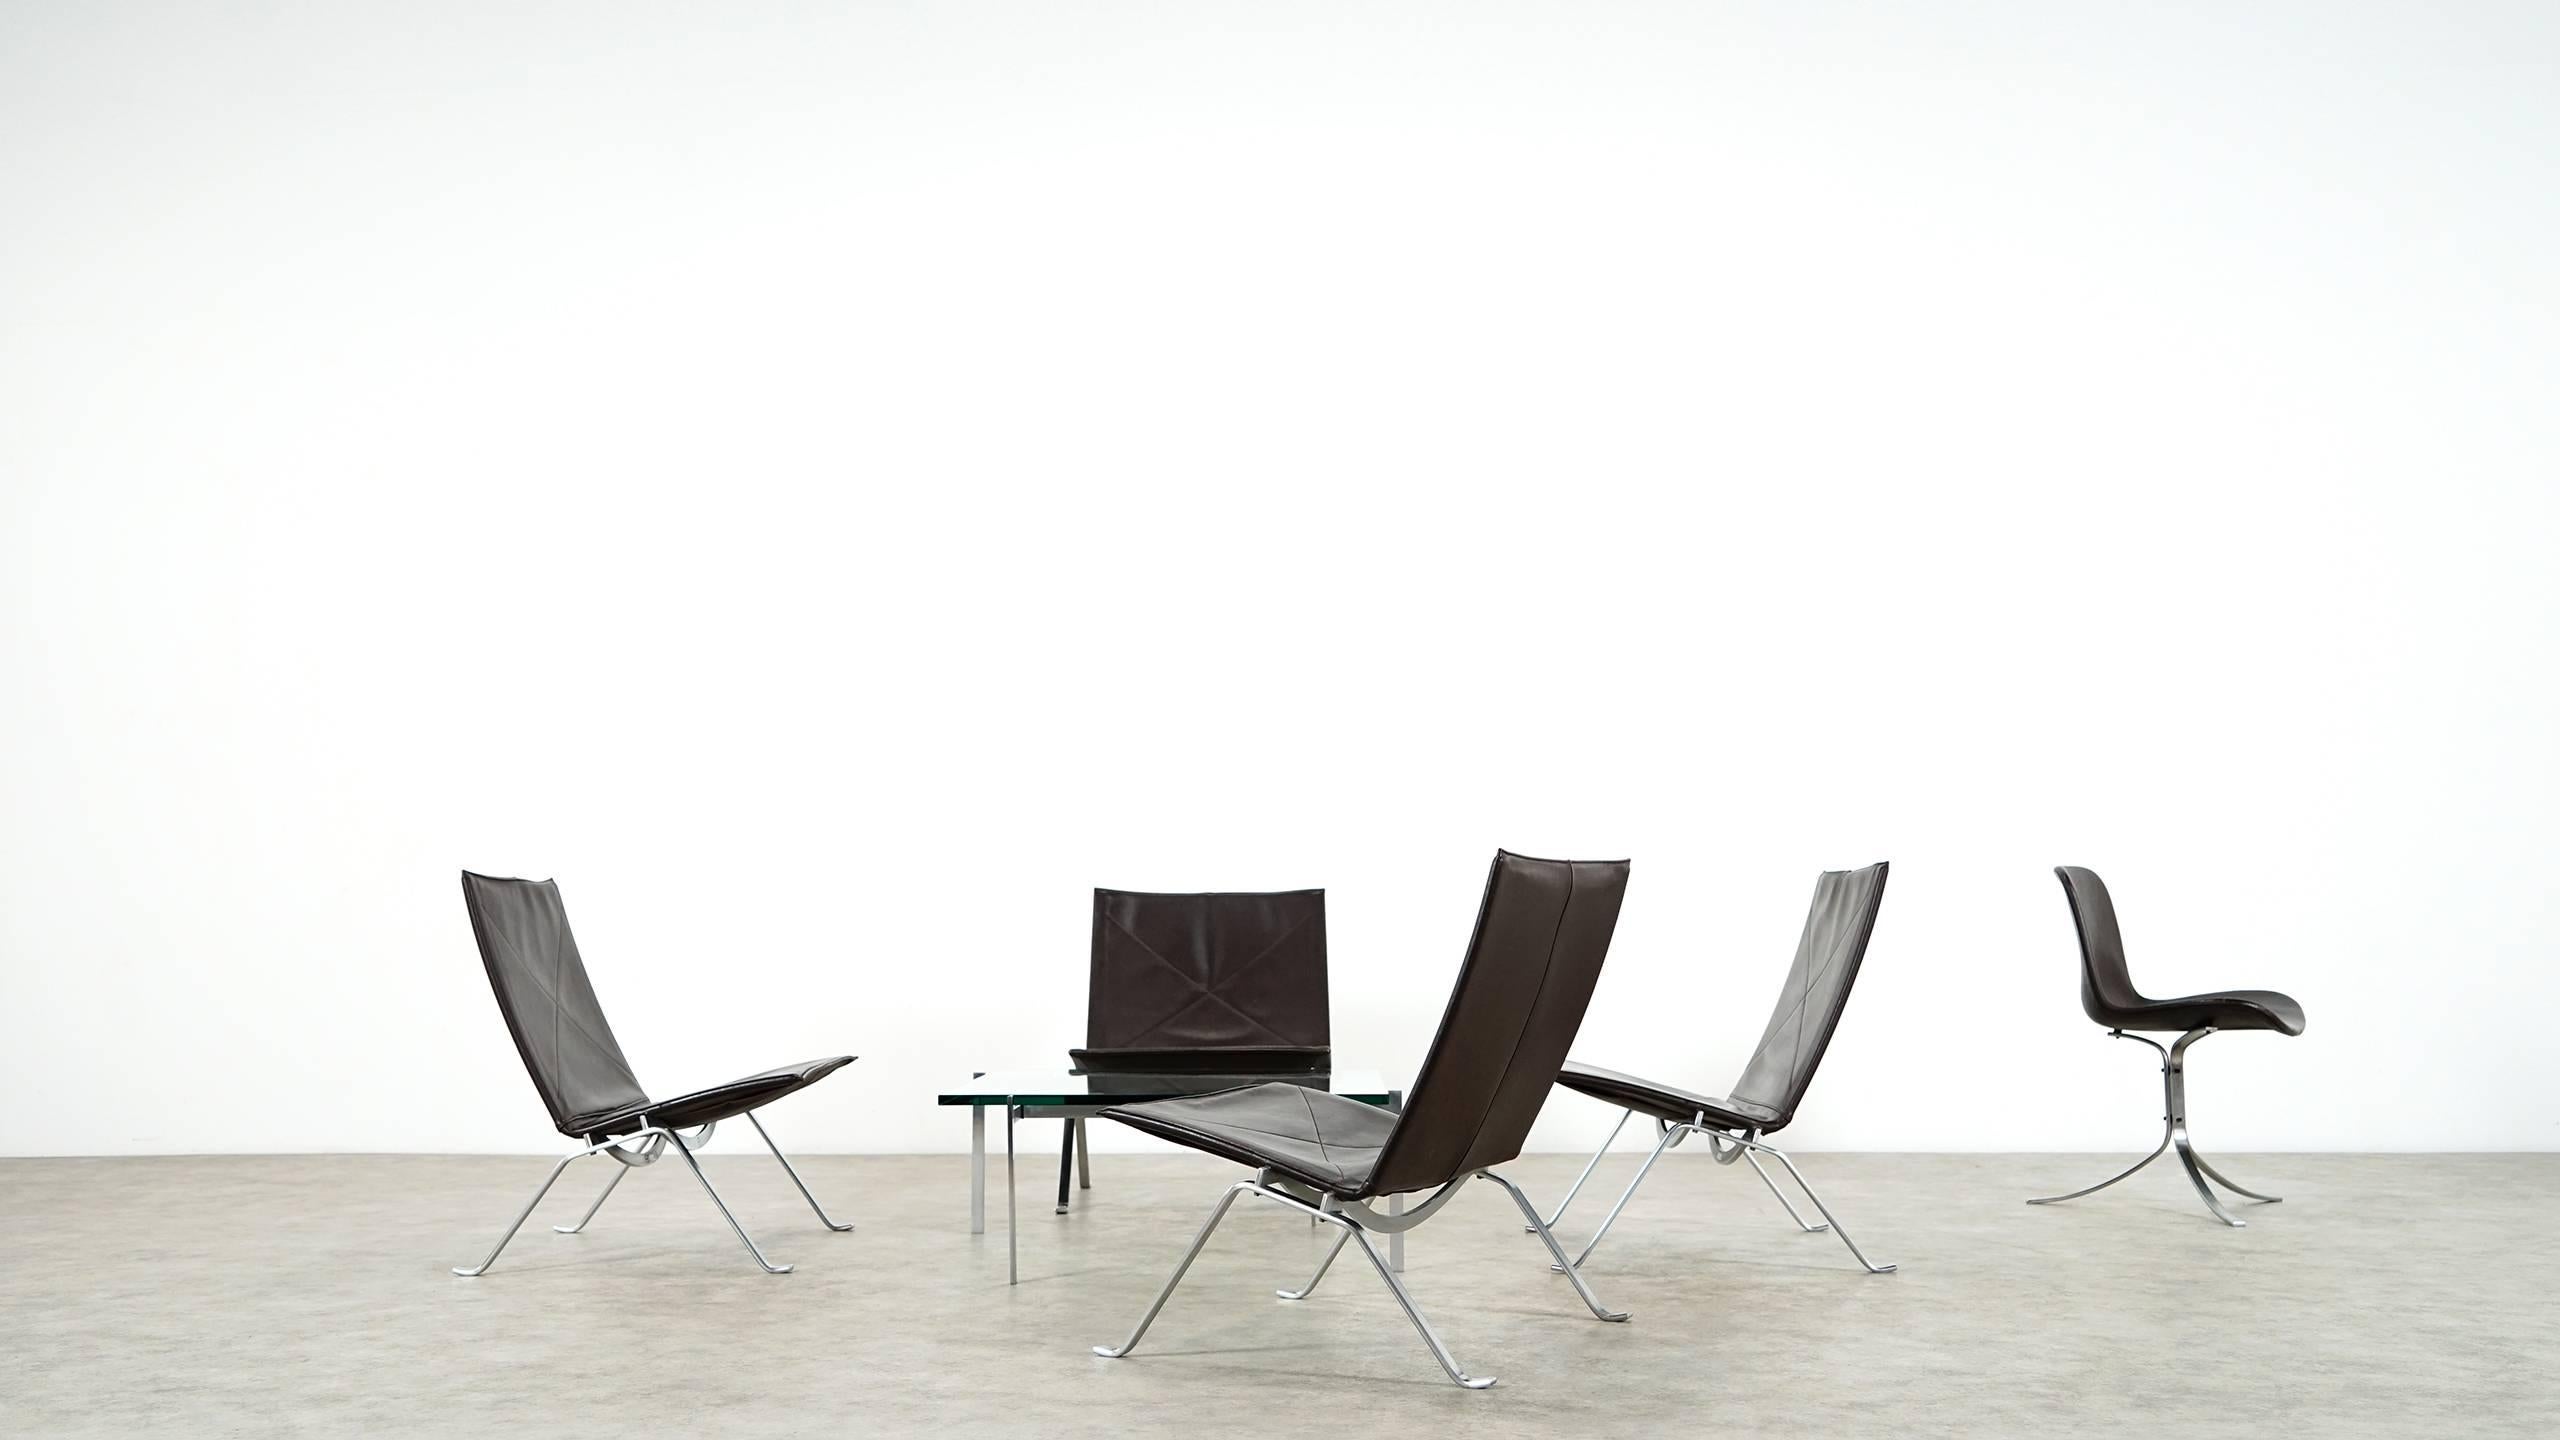 The discrete and elegant lounge chair PK22 epitomizes the work of Poul Kjærholm and his search for the ideal type-form and industrial dimension, which was always present in his work.

This offer is for two near-to-perfect PK22 lounge chairs,